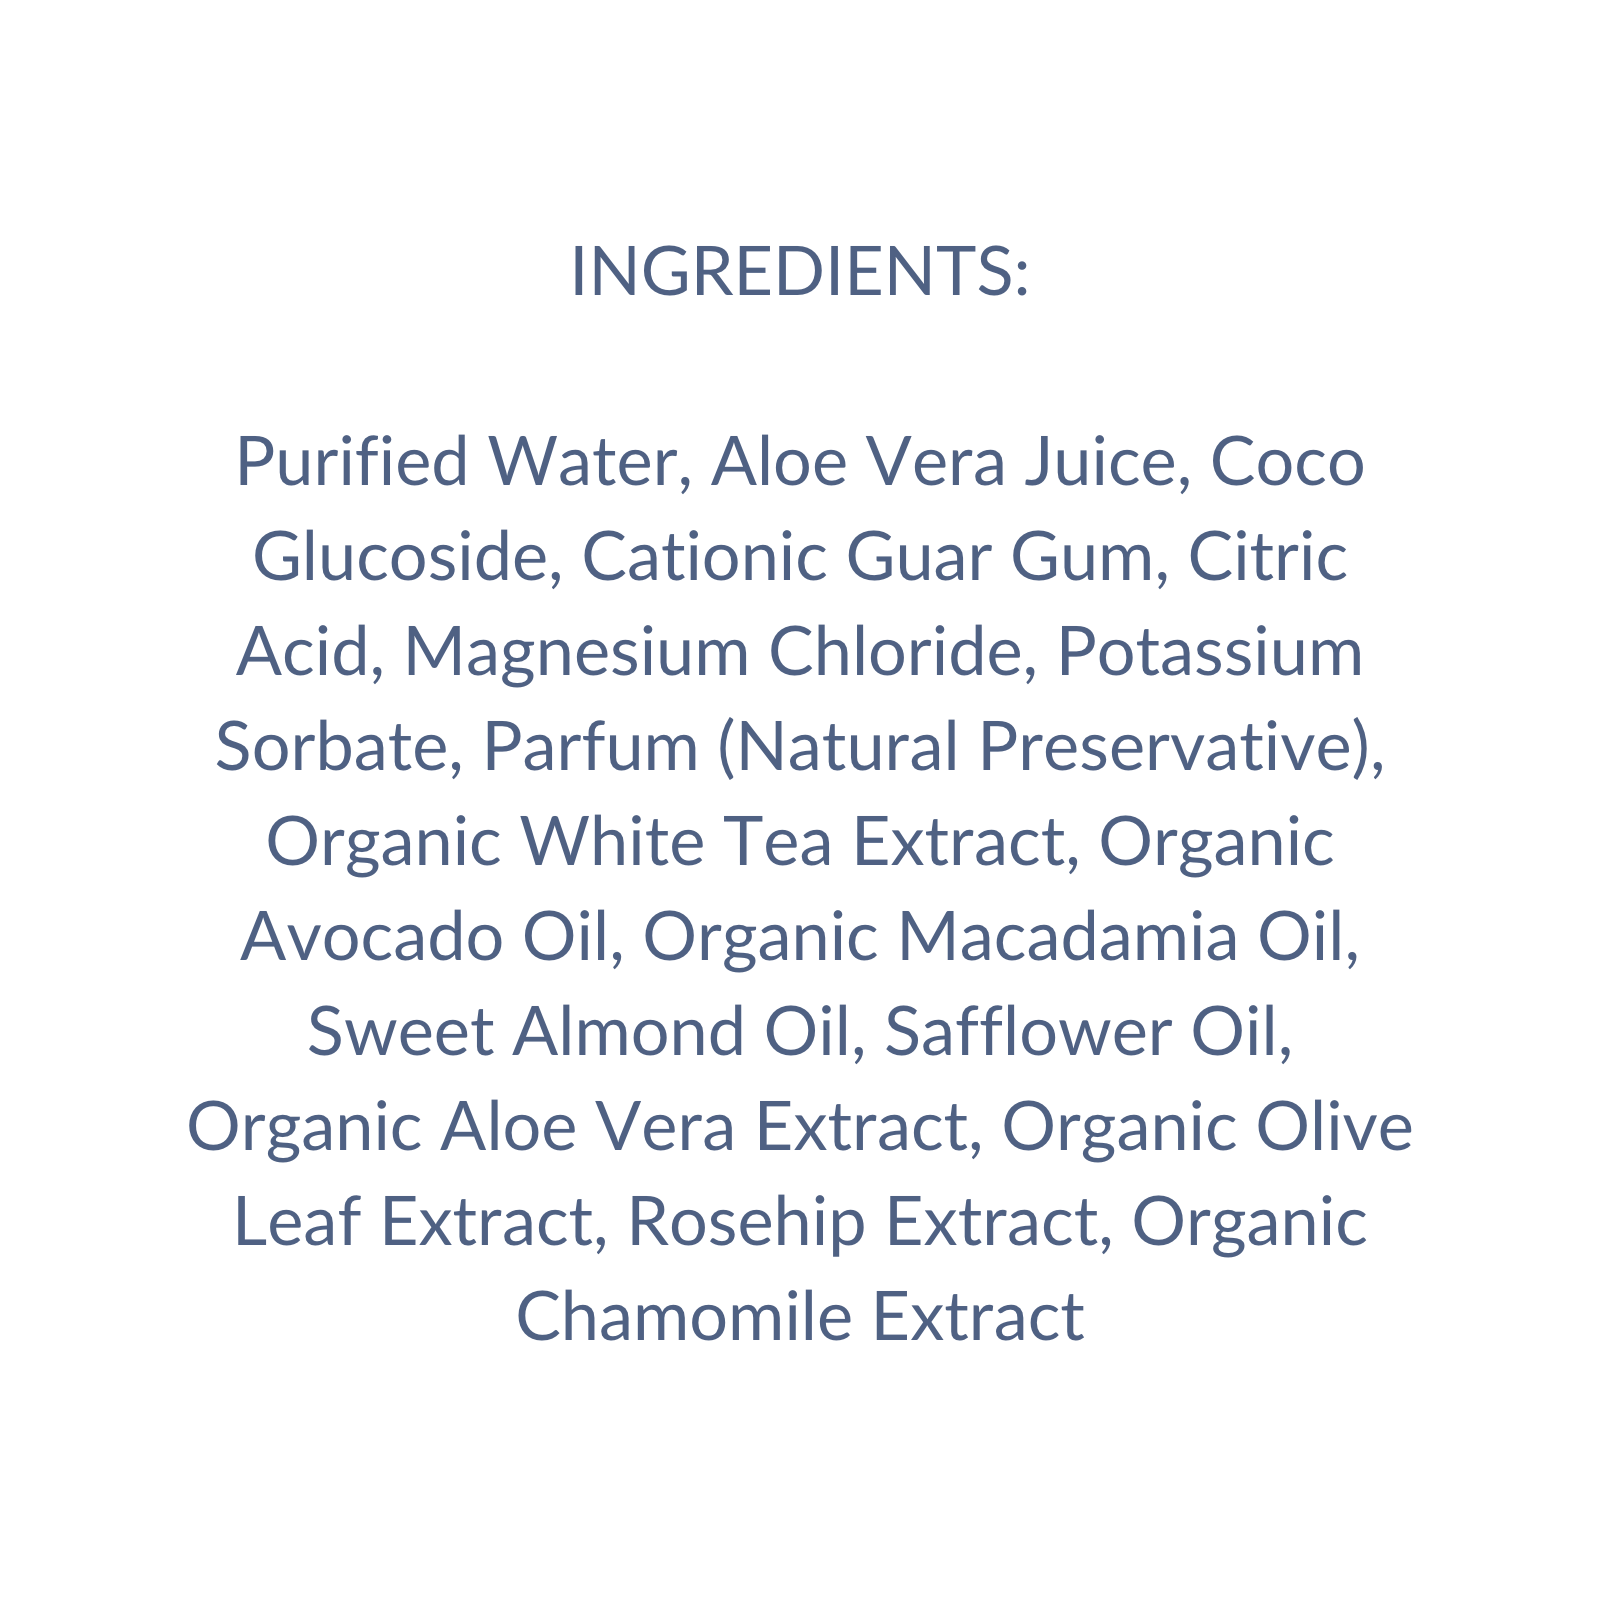 list of ingredients of product